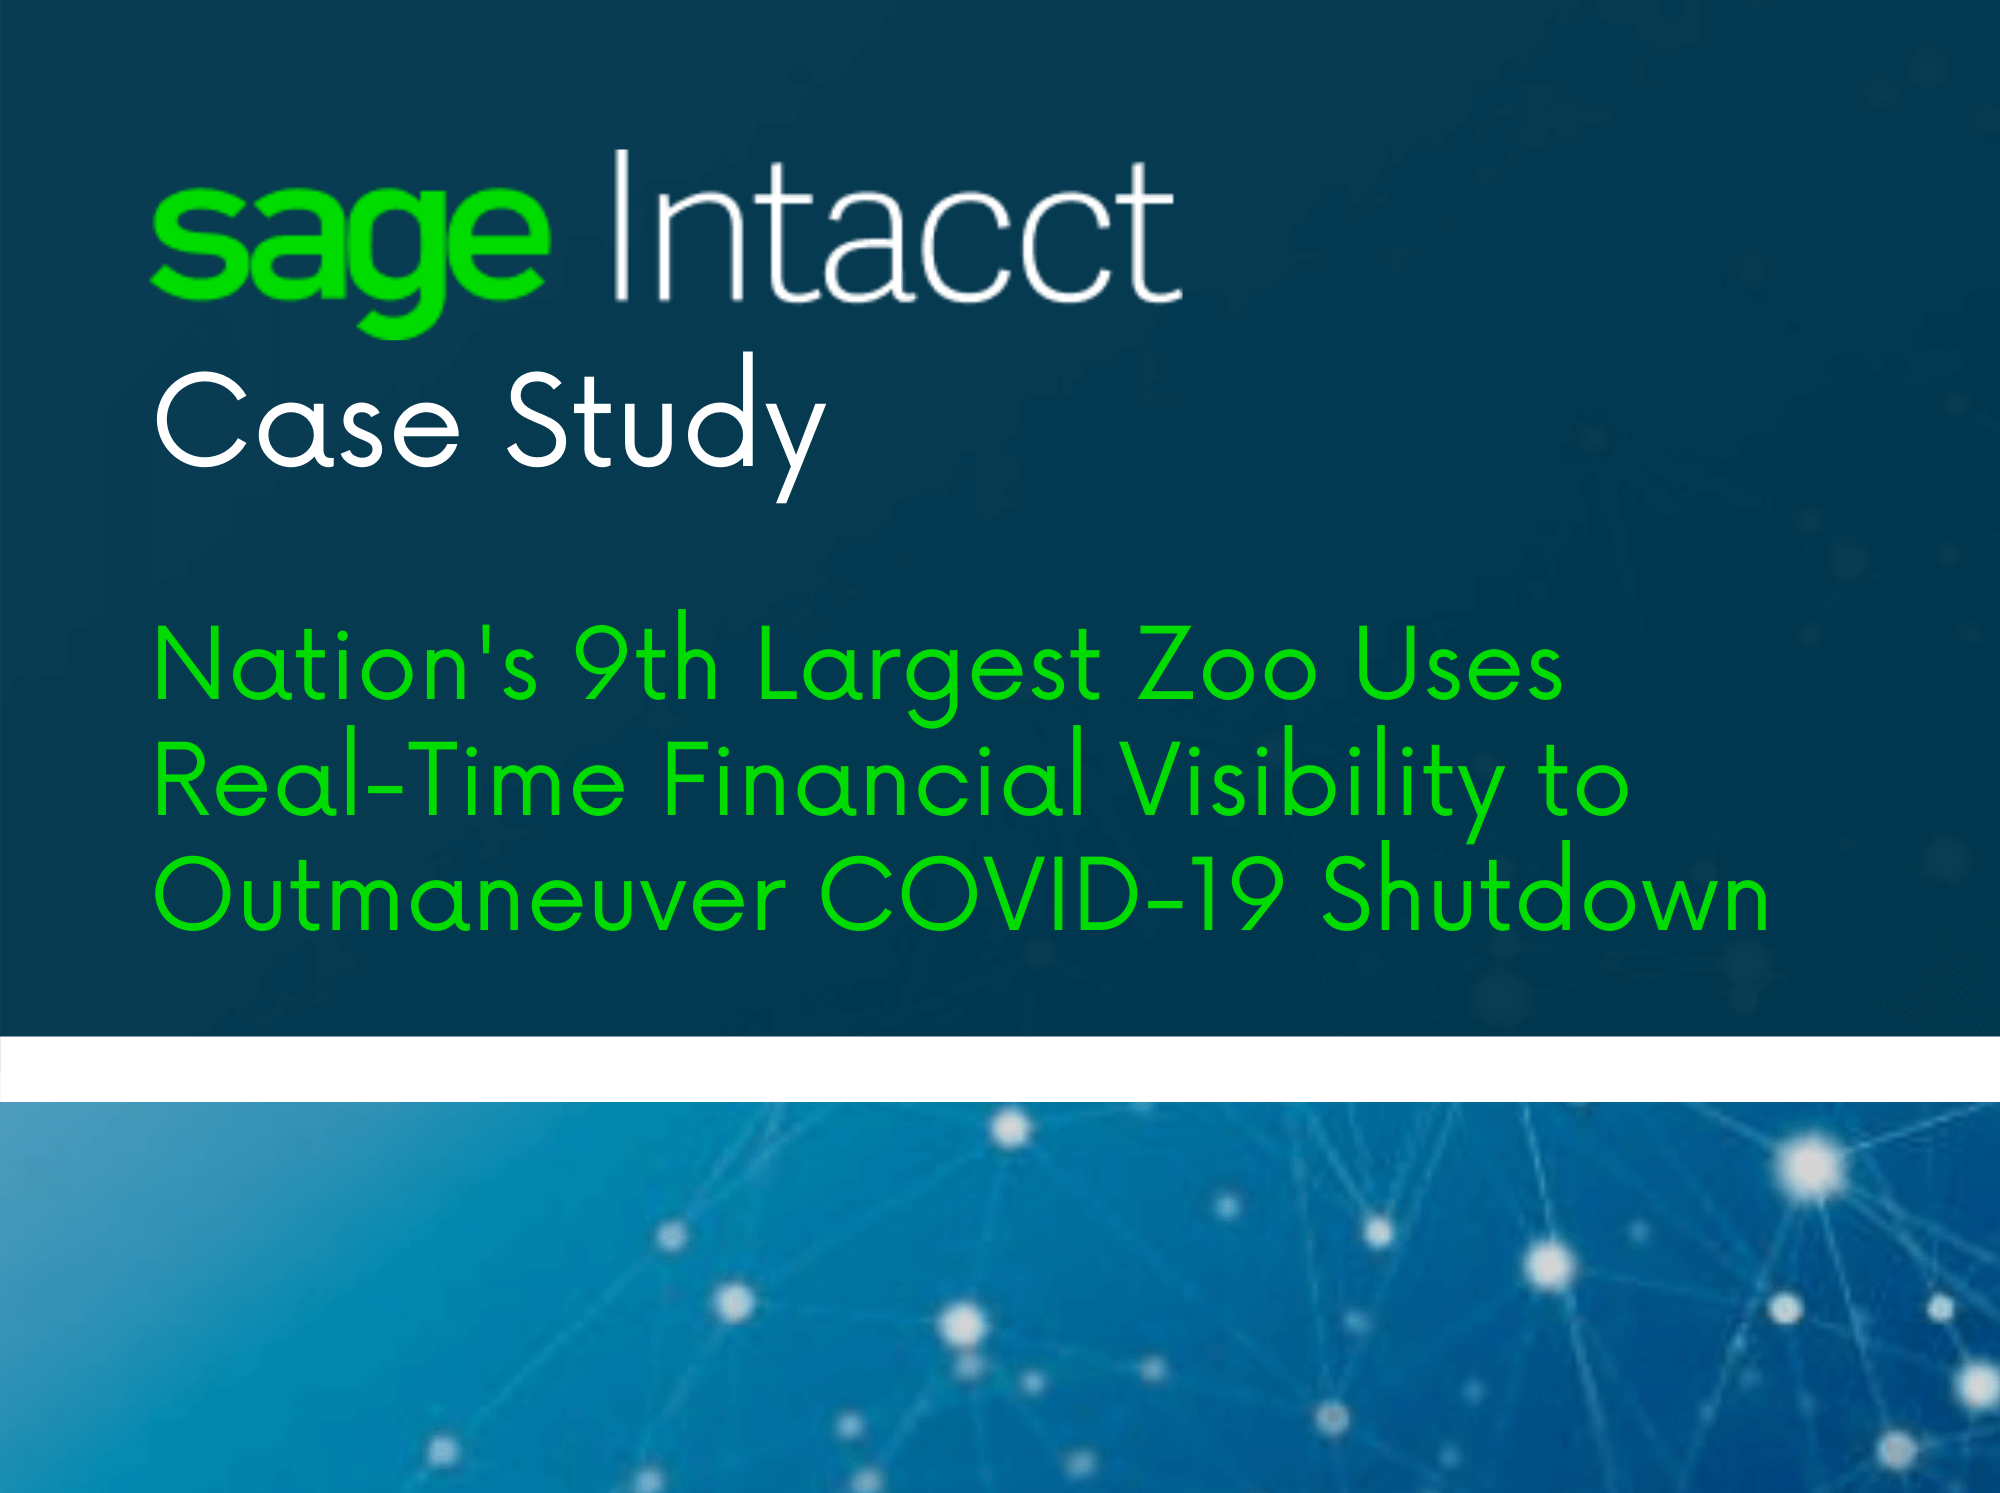 Sage Intacct Case Study: Nation’s 9th Largest Zoo Uses Real-Time Financial Visibility to Outmaneuver COVID-19 Shutdown